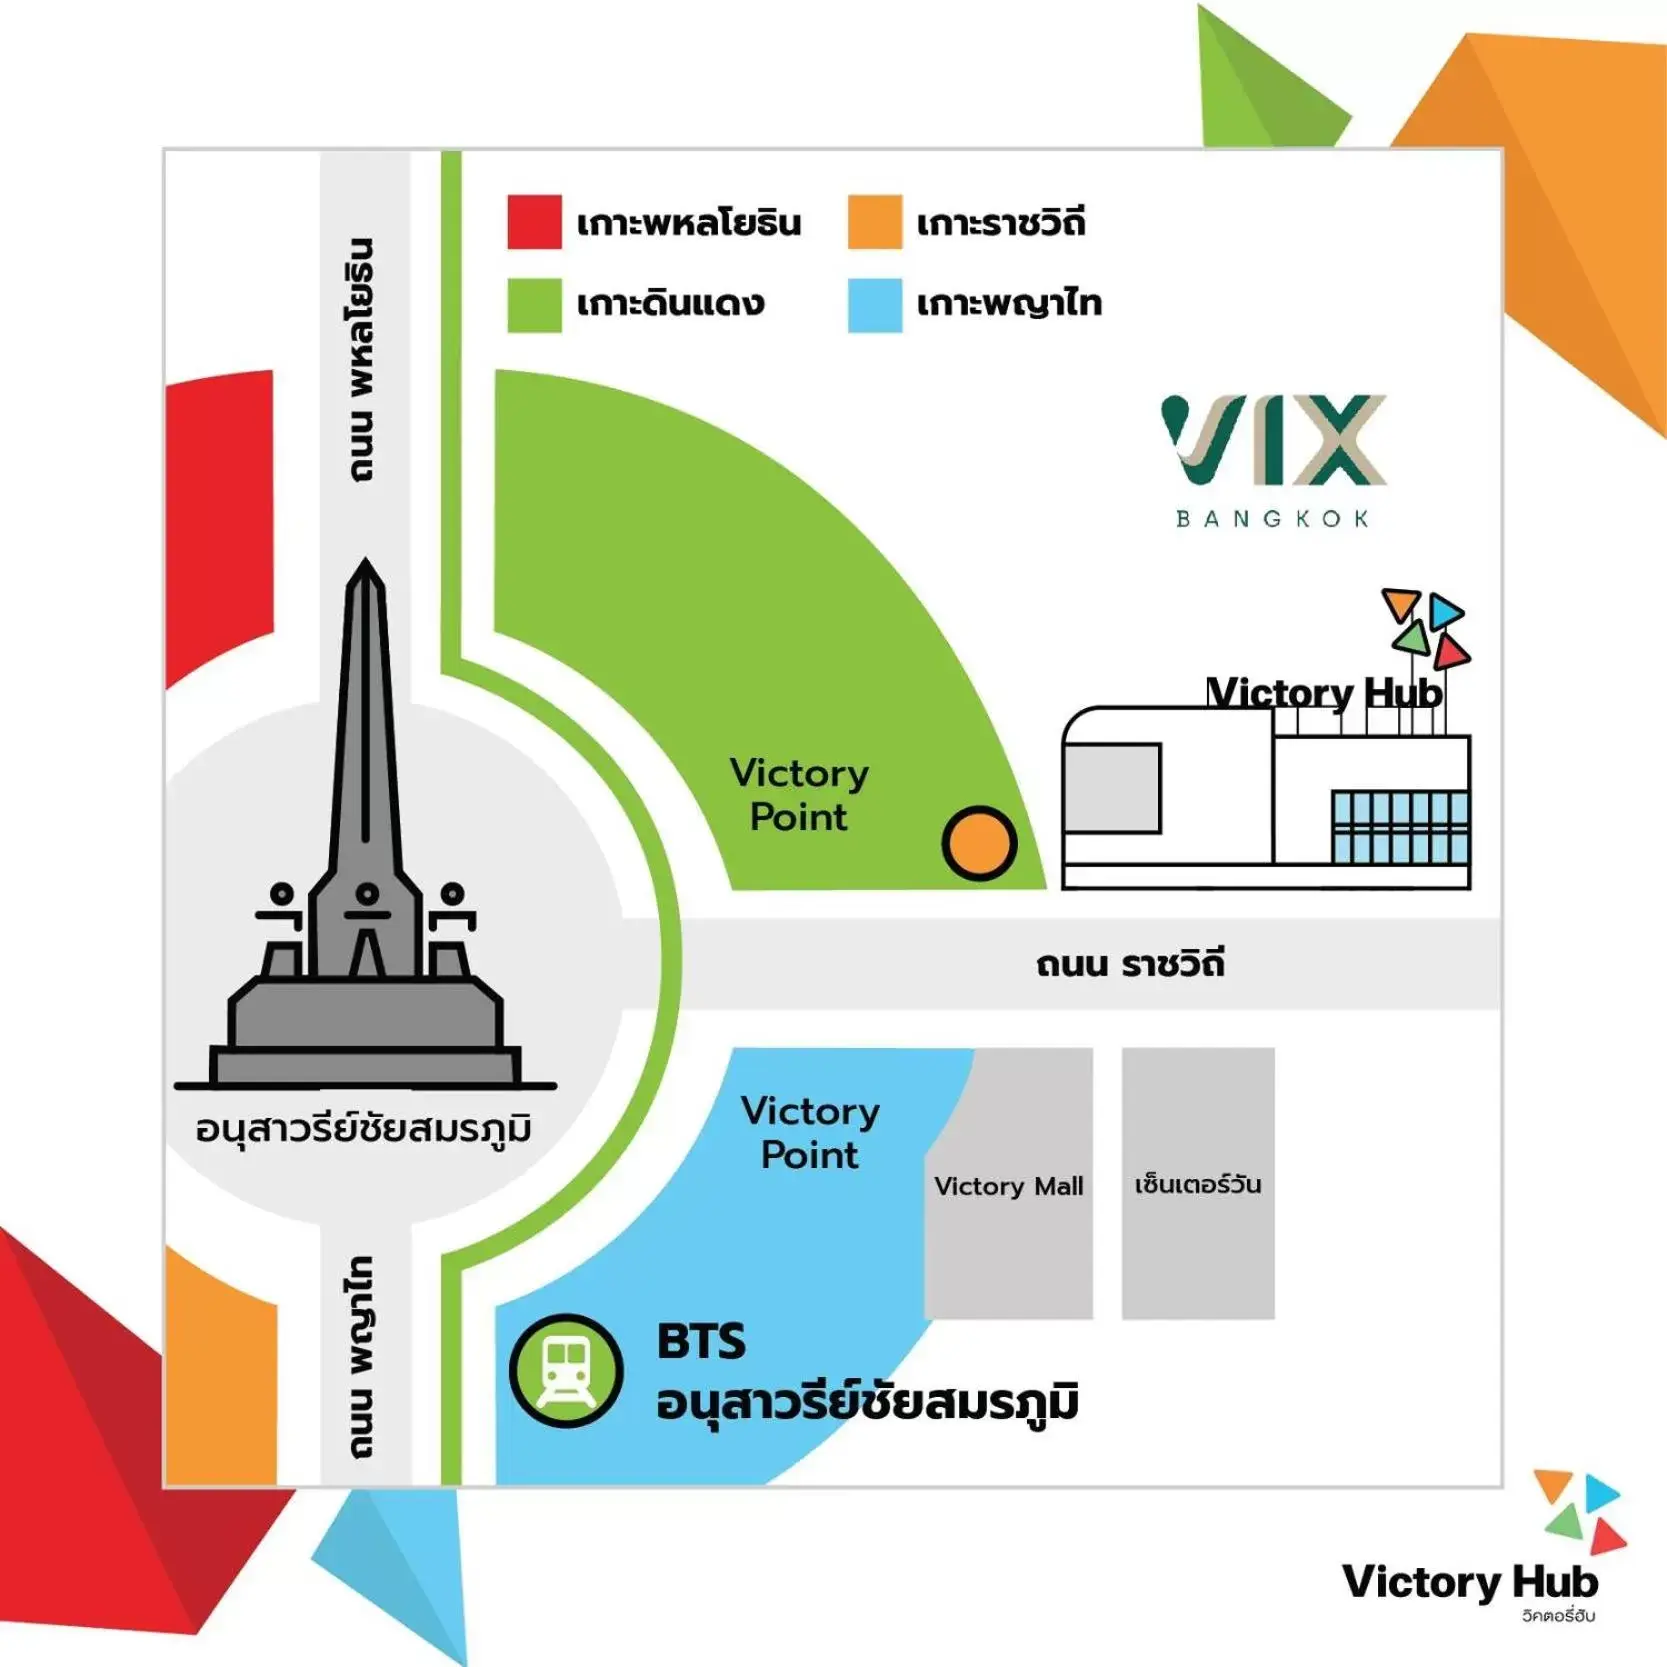 Text overlay, Floor Plan in VIX Bangkok at Victory Monument